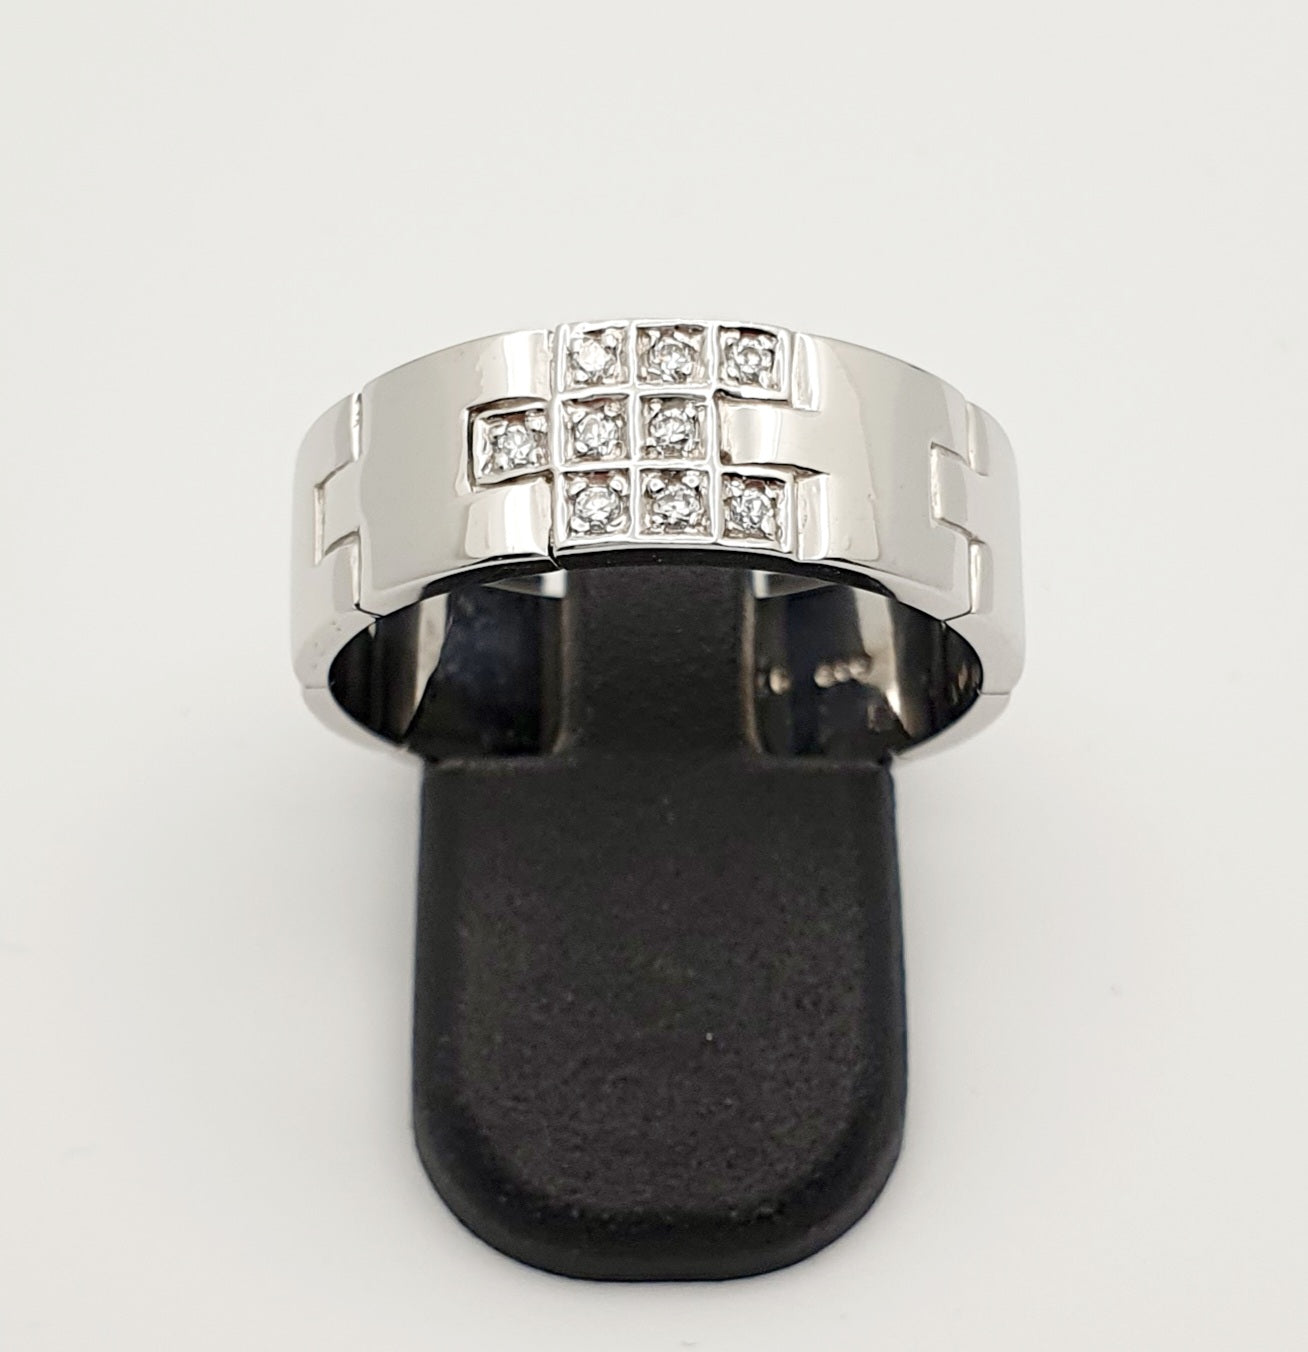 S/S Gents Puzzle Look Ring set with CZ's. Size S 1/2